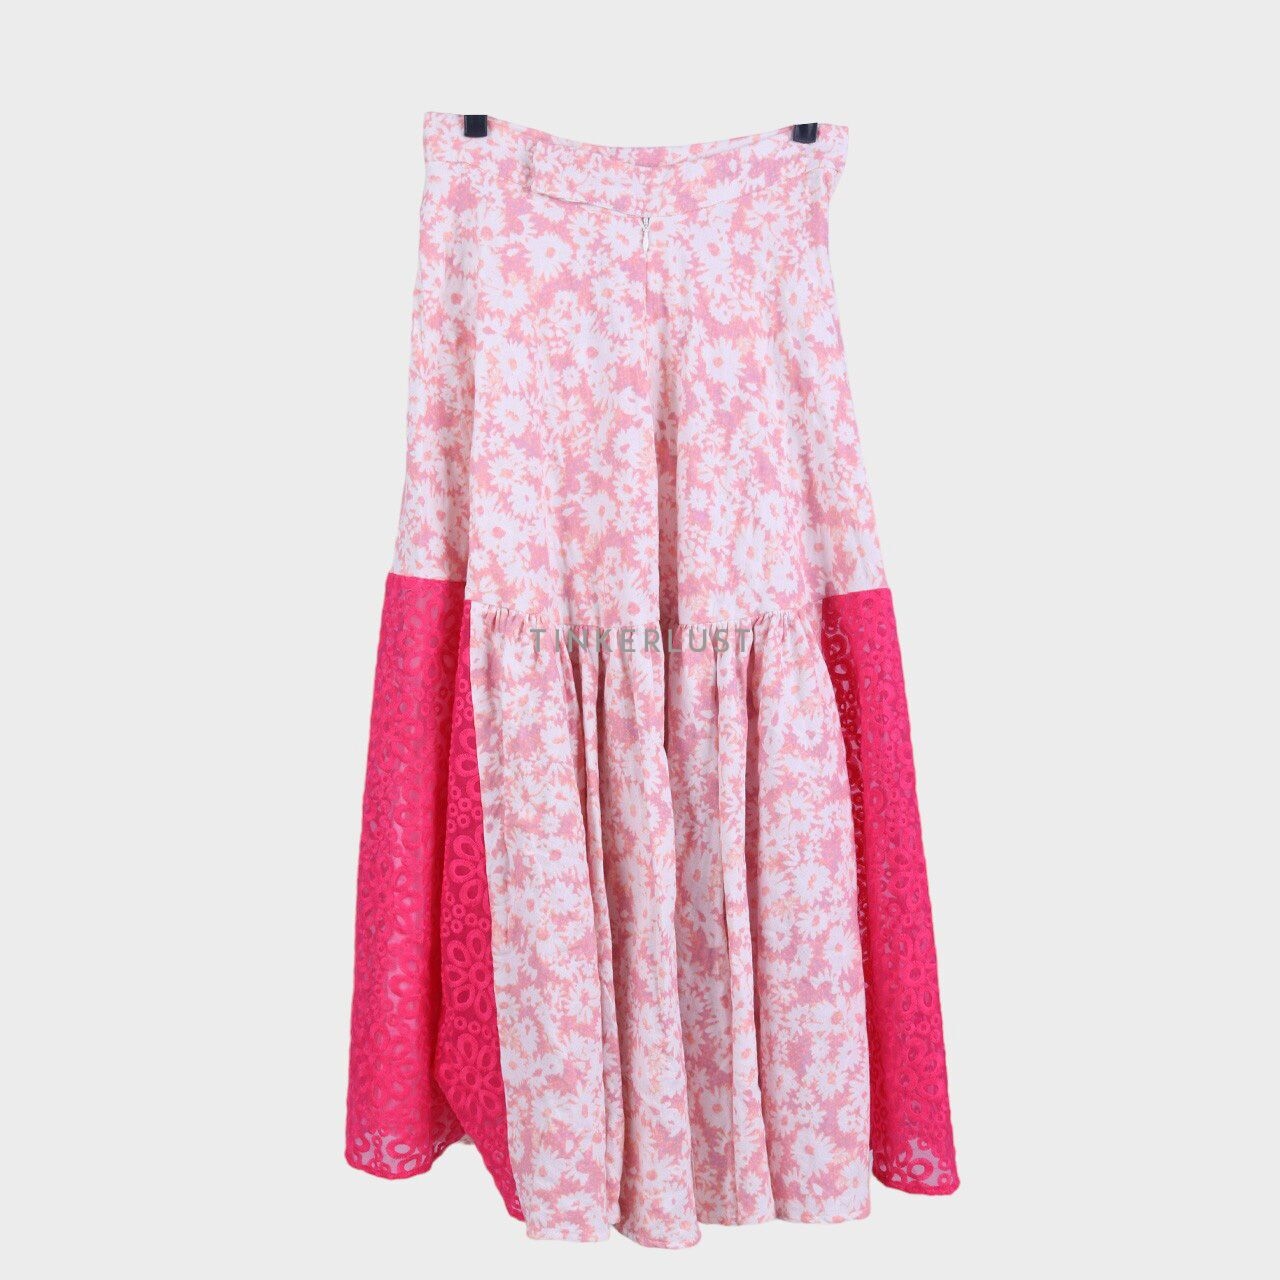 Tities Sapoetra Pink & White Floral Maxi Skirt